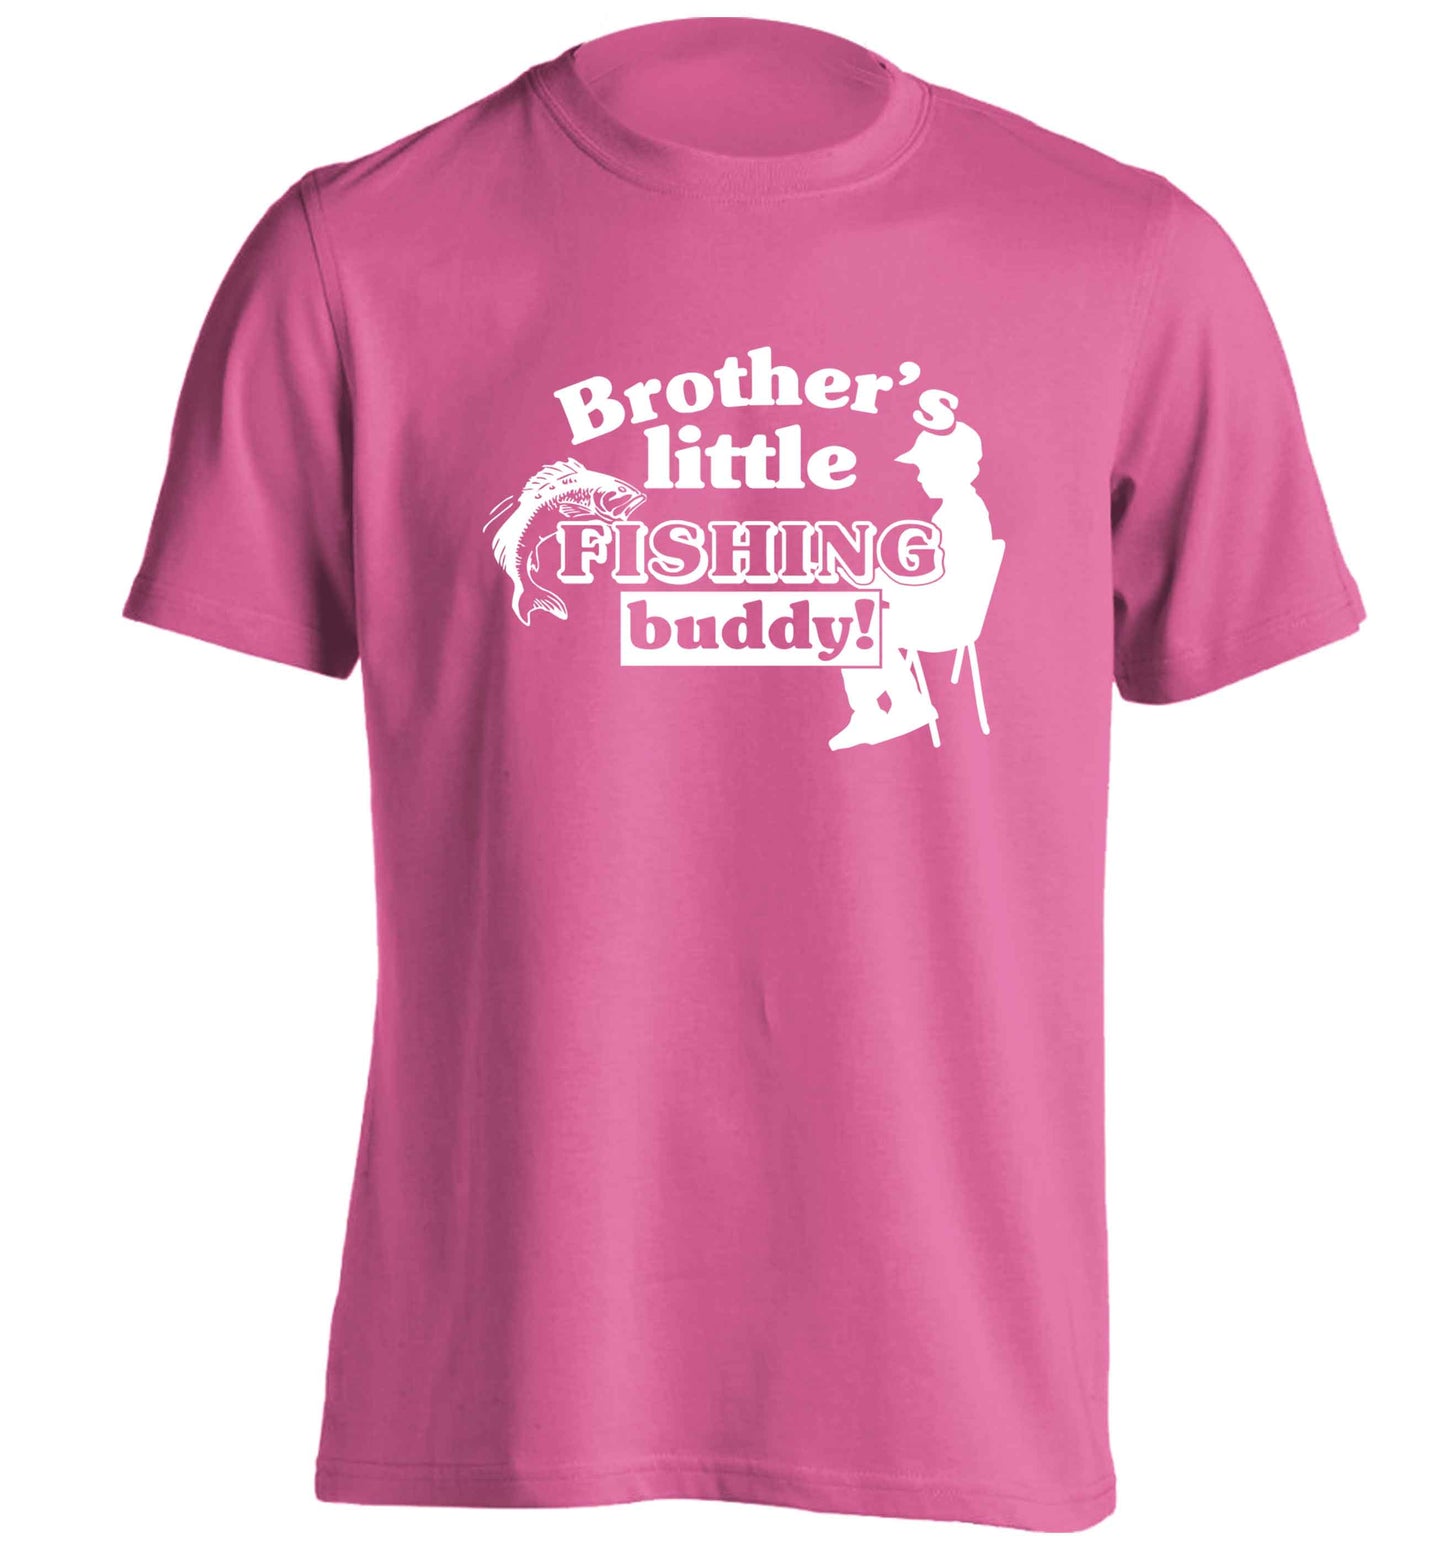 Brother's little fishing buddy adults unisex pink Tshirt 2XL